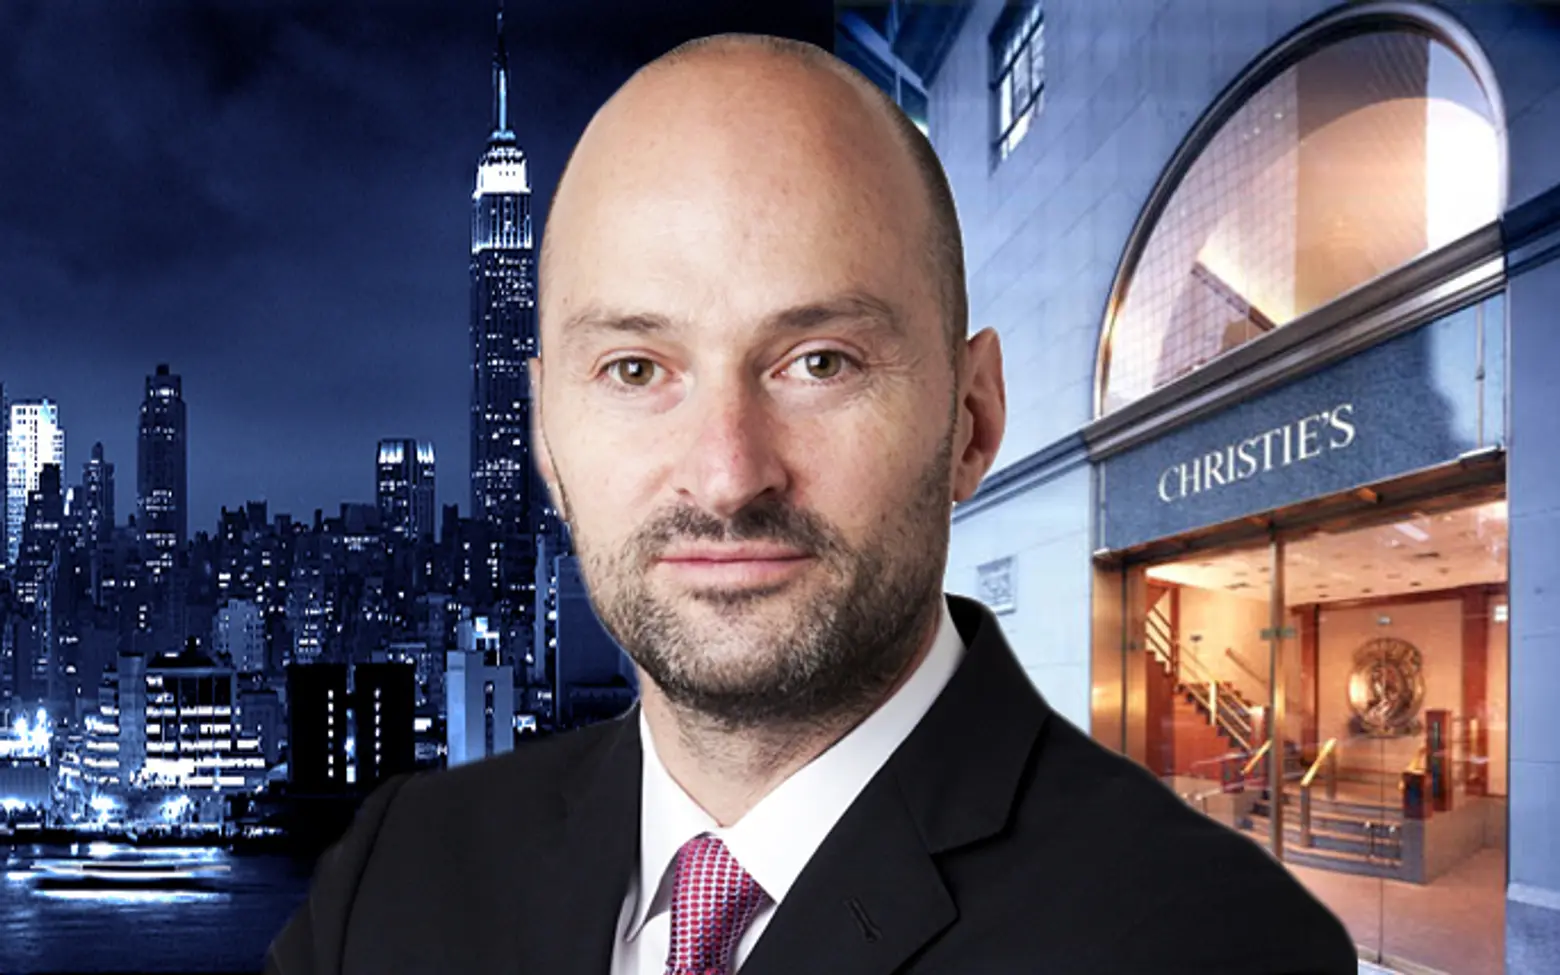 New Yorker Spotlight: Behind the Watch Counter at Christie’s with Mr. Reginald Brack